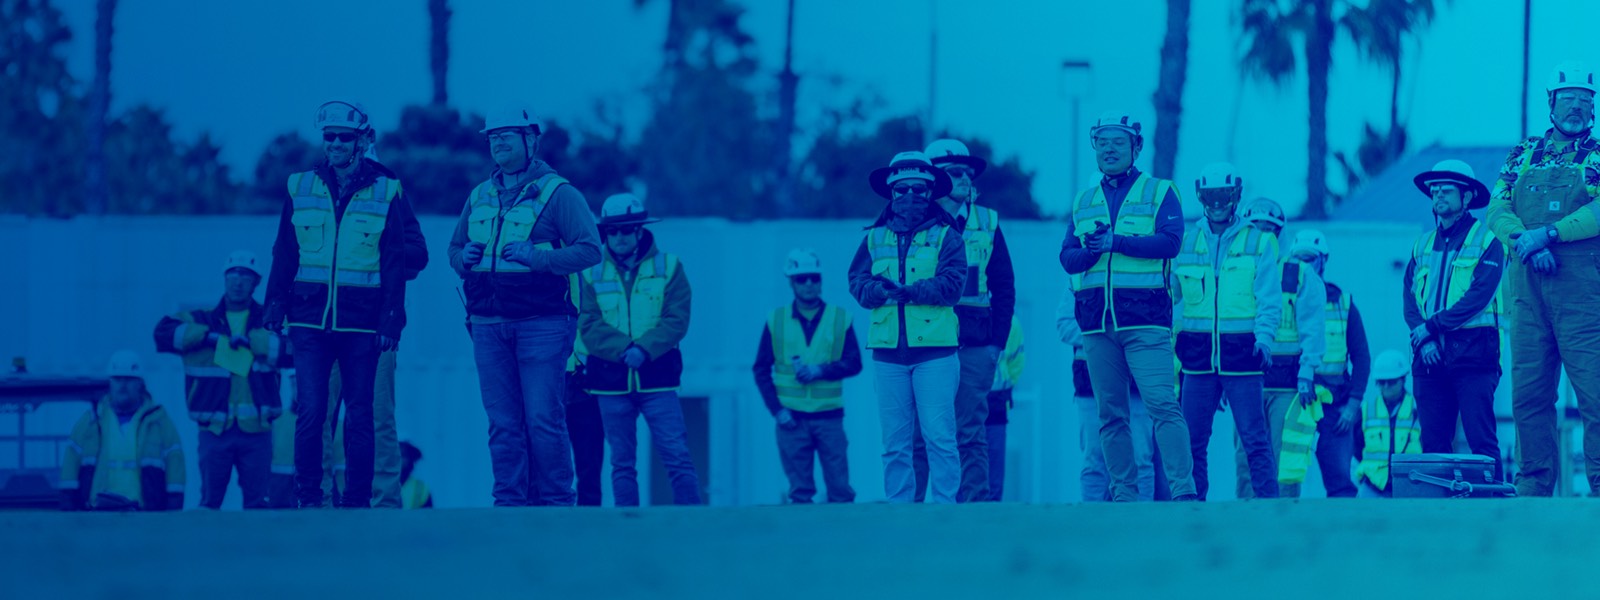 construction workers in California blue overlay